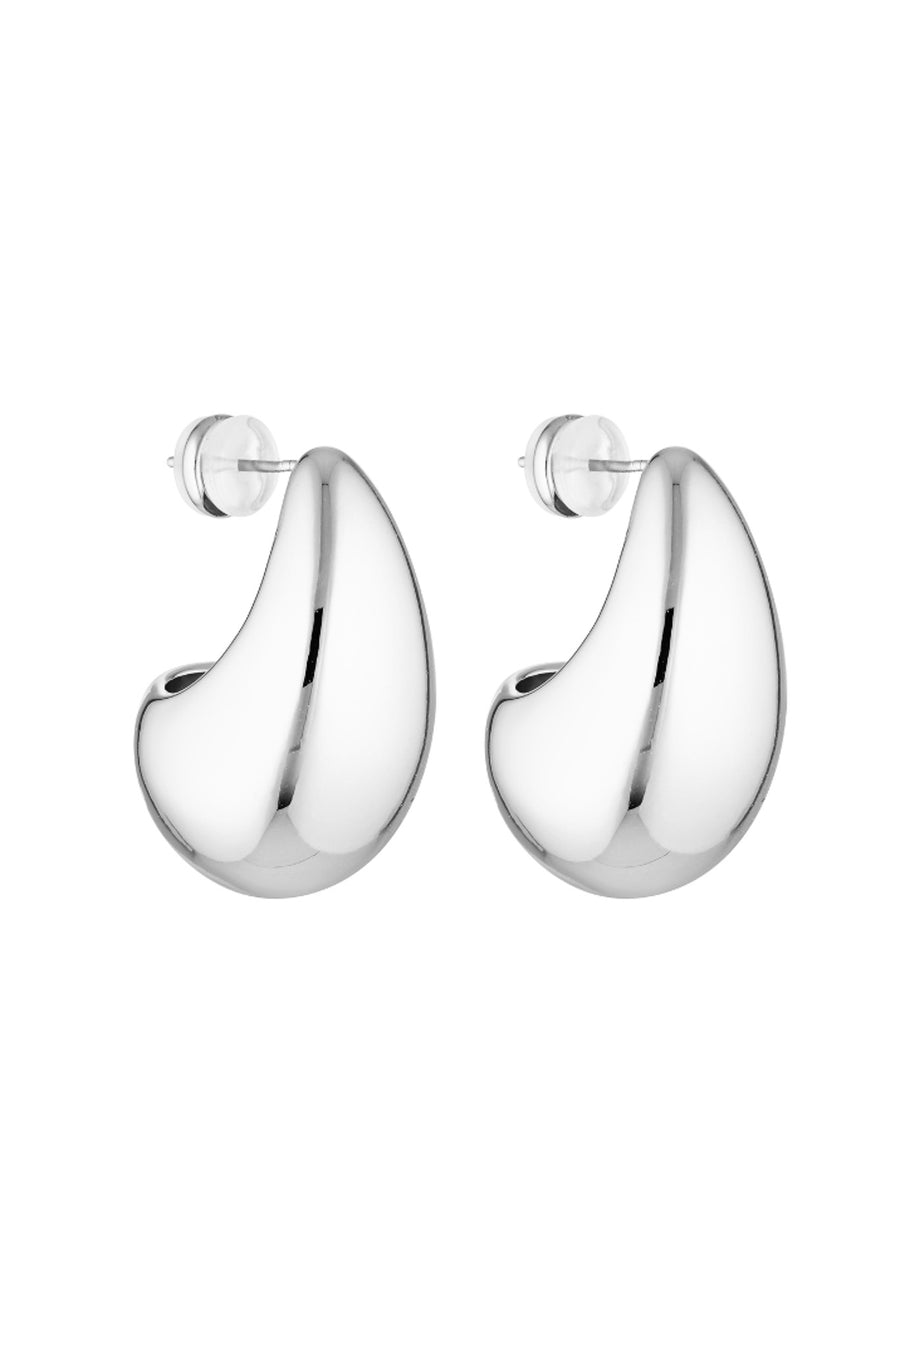 BLOB EARRINGS SILVER - EXCLUSIVE